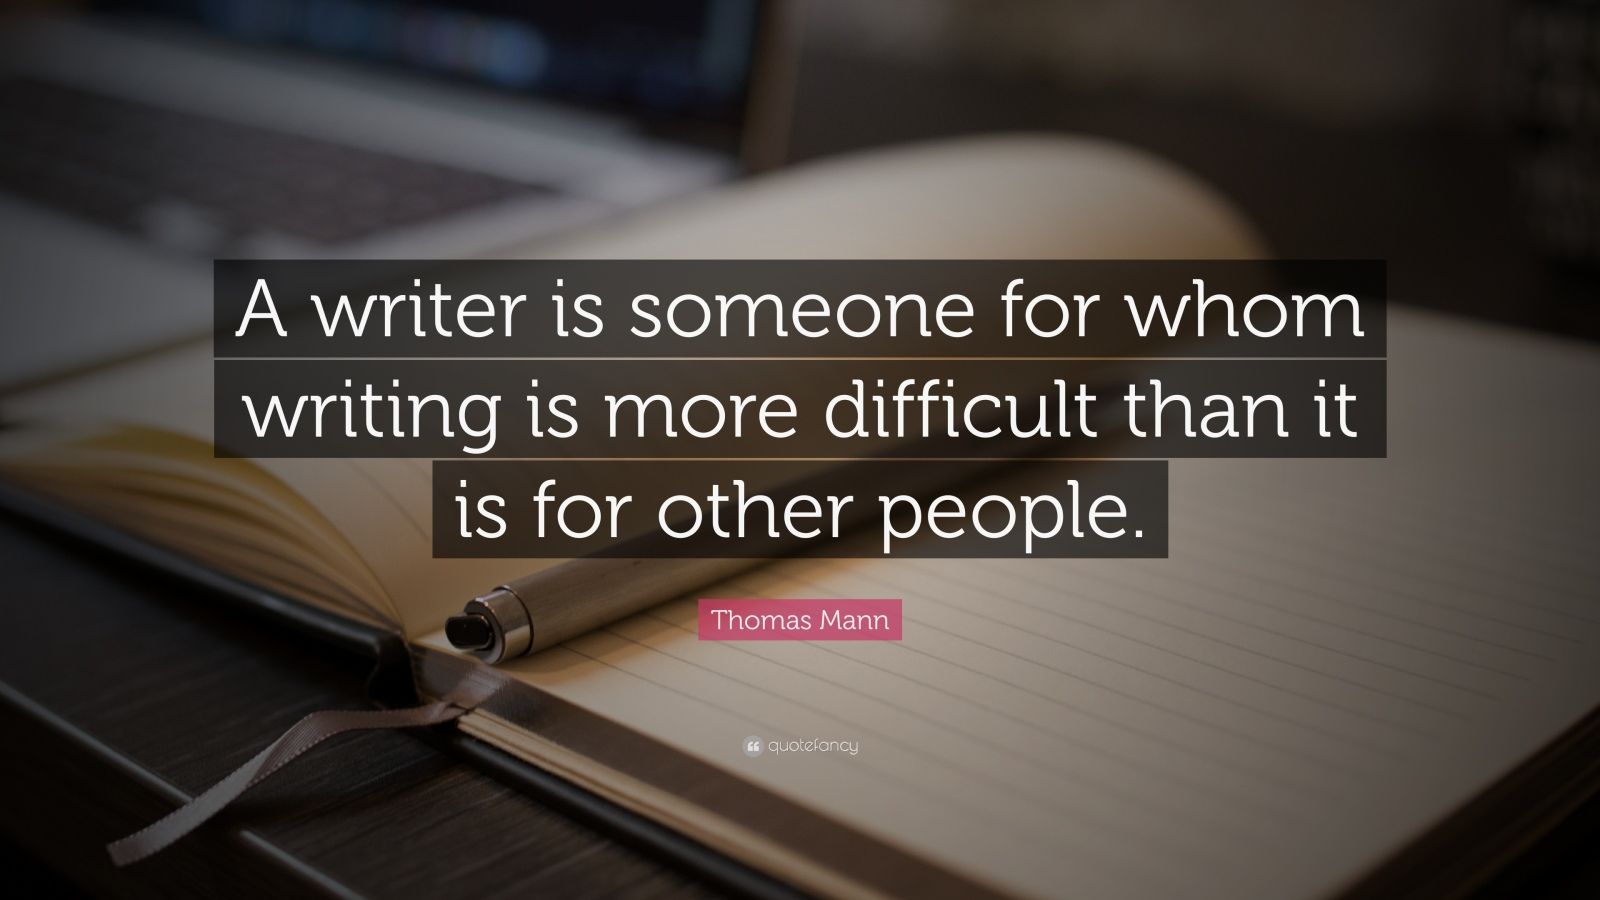 Quotes About Writing (57 wallpapers) - Quotefancy